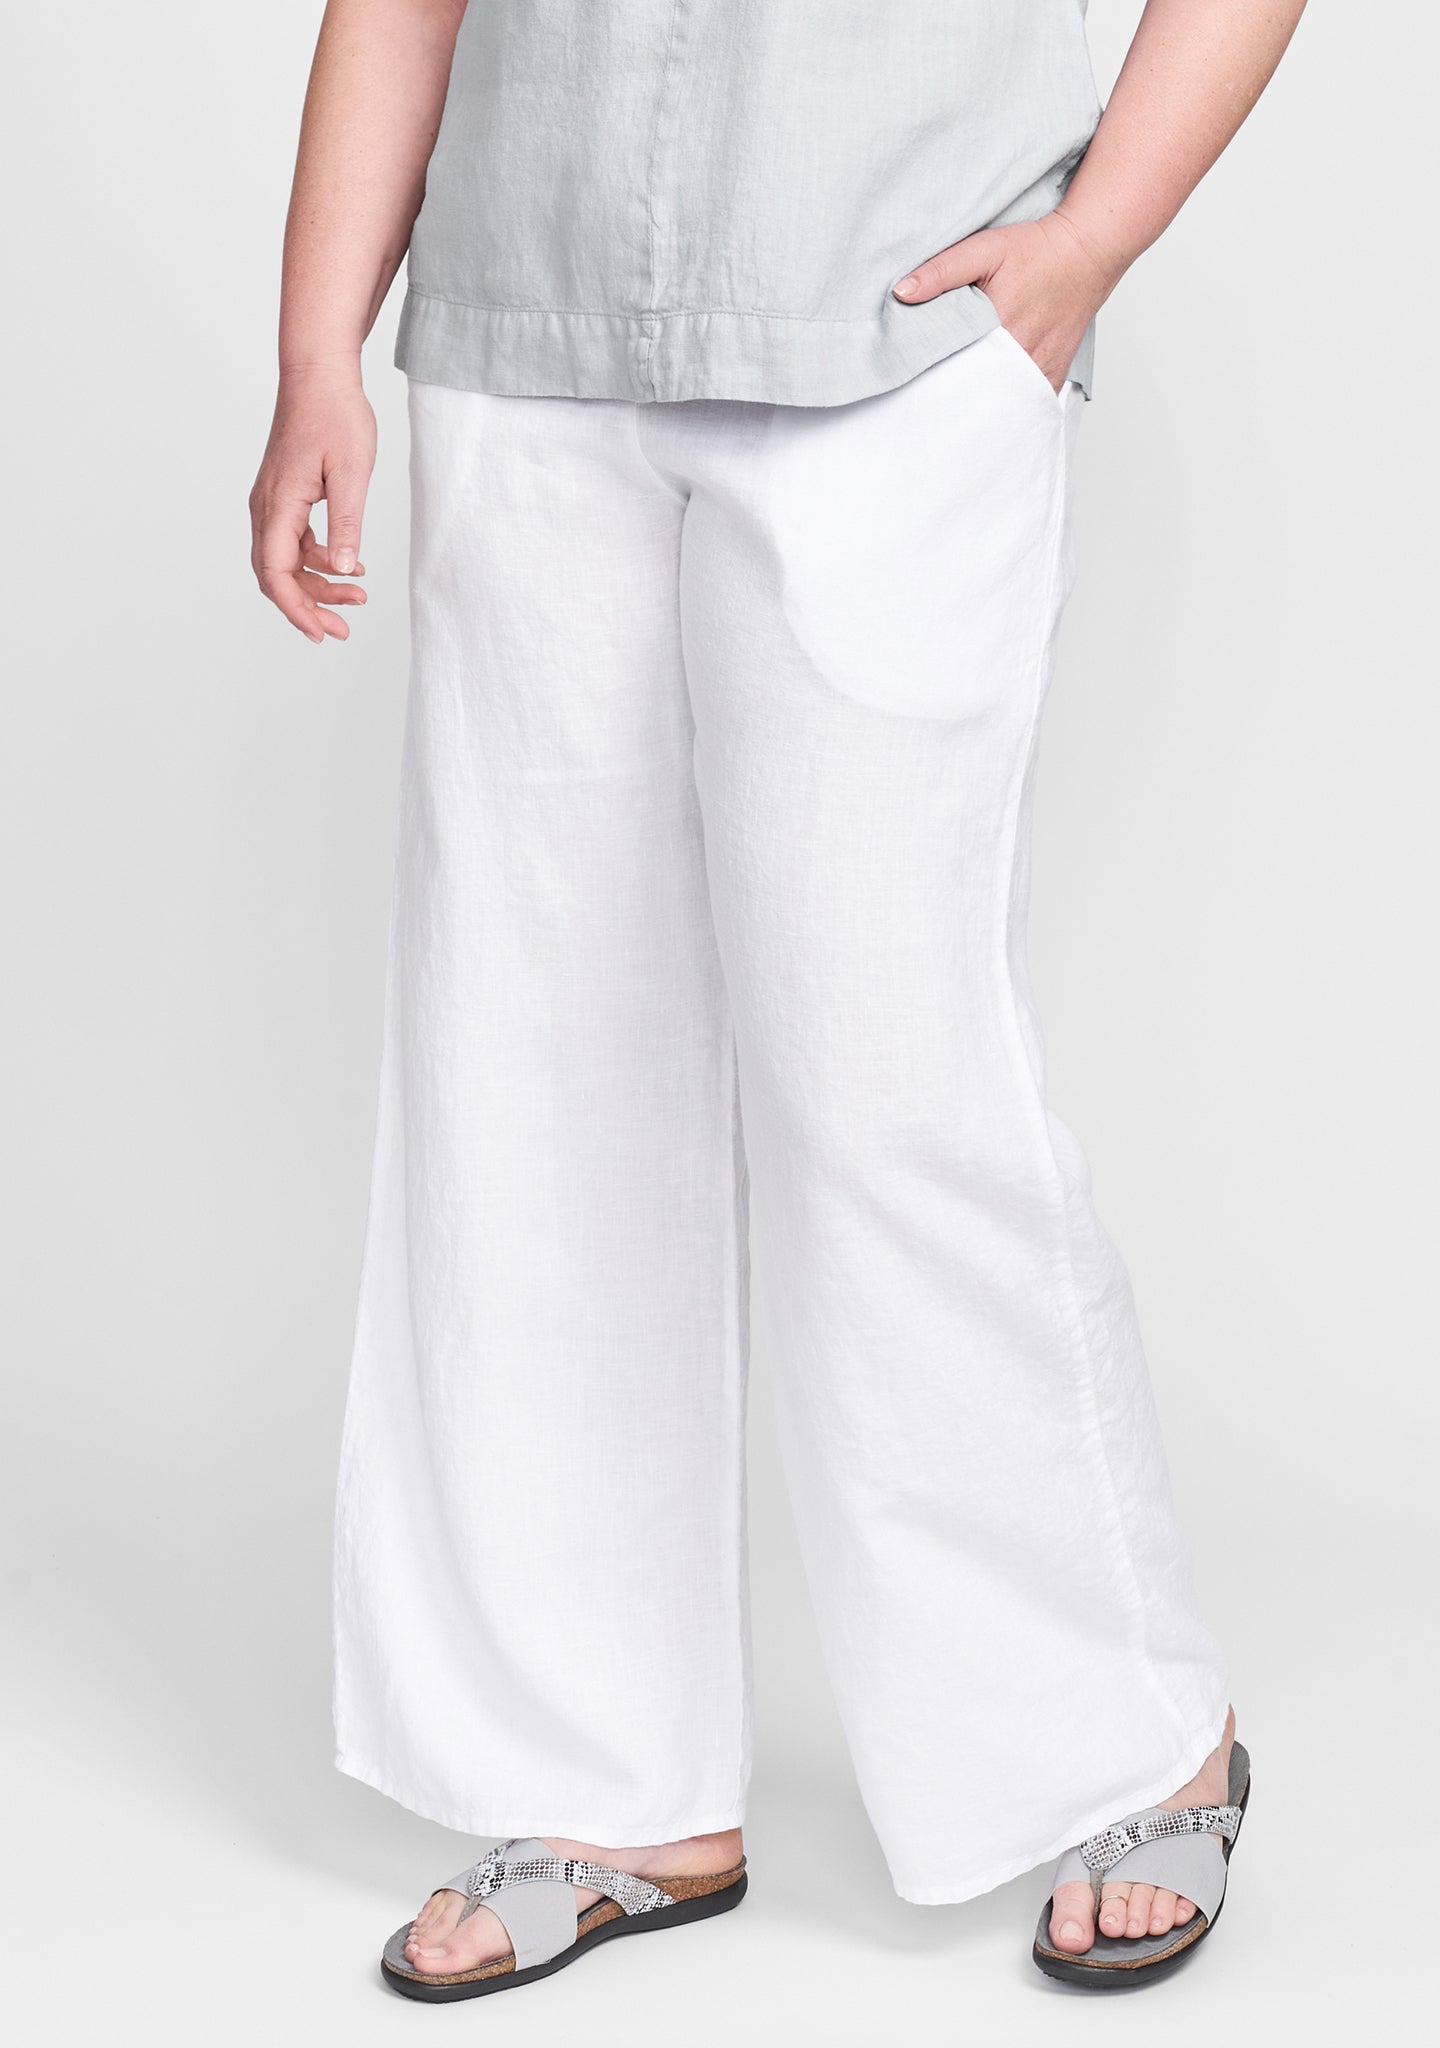 Cotton And Linen Daily Drawstring Pants - boddysize